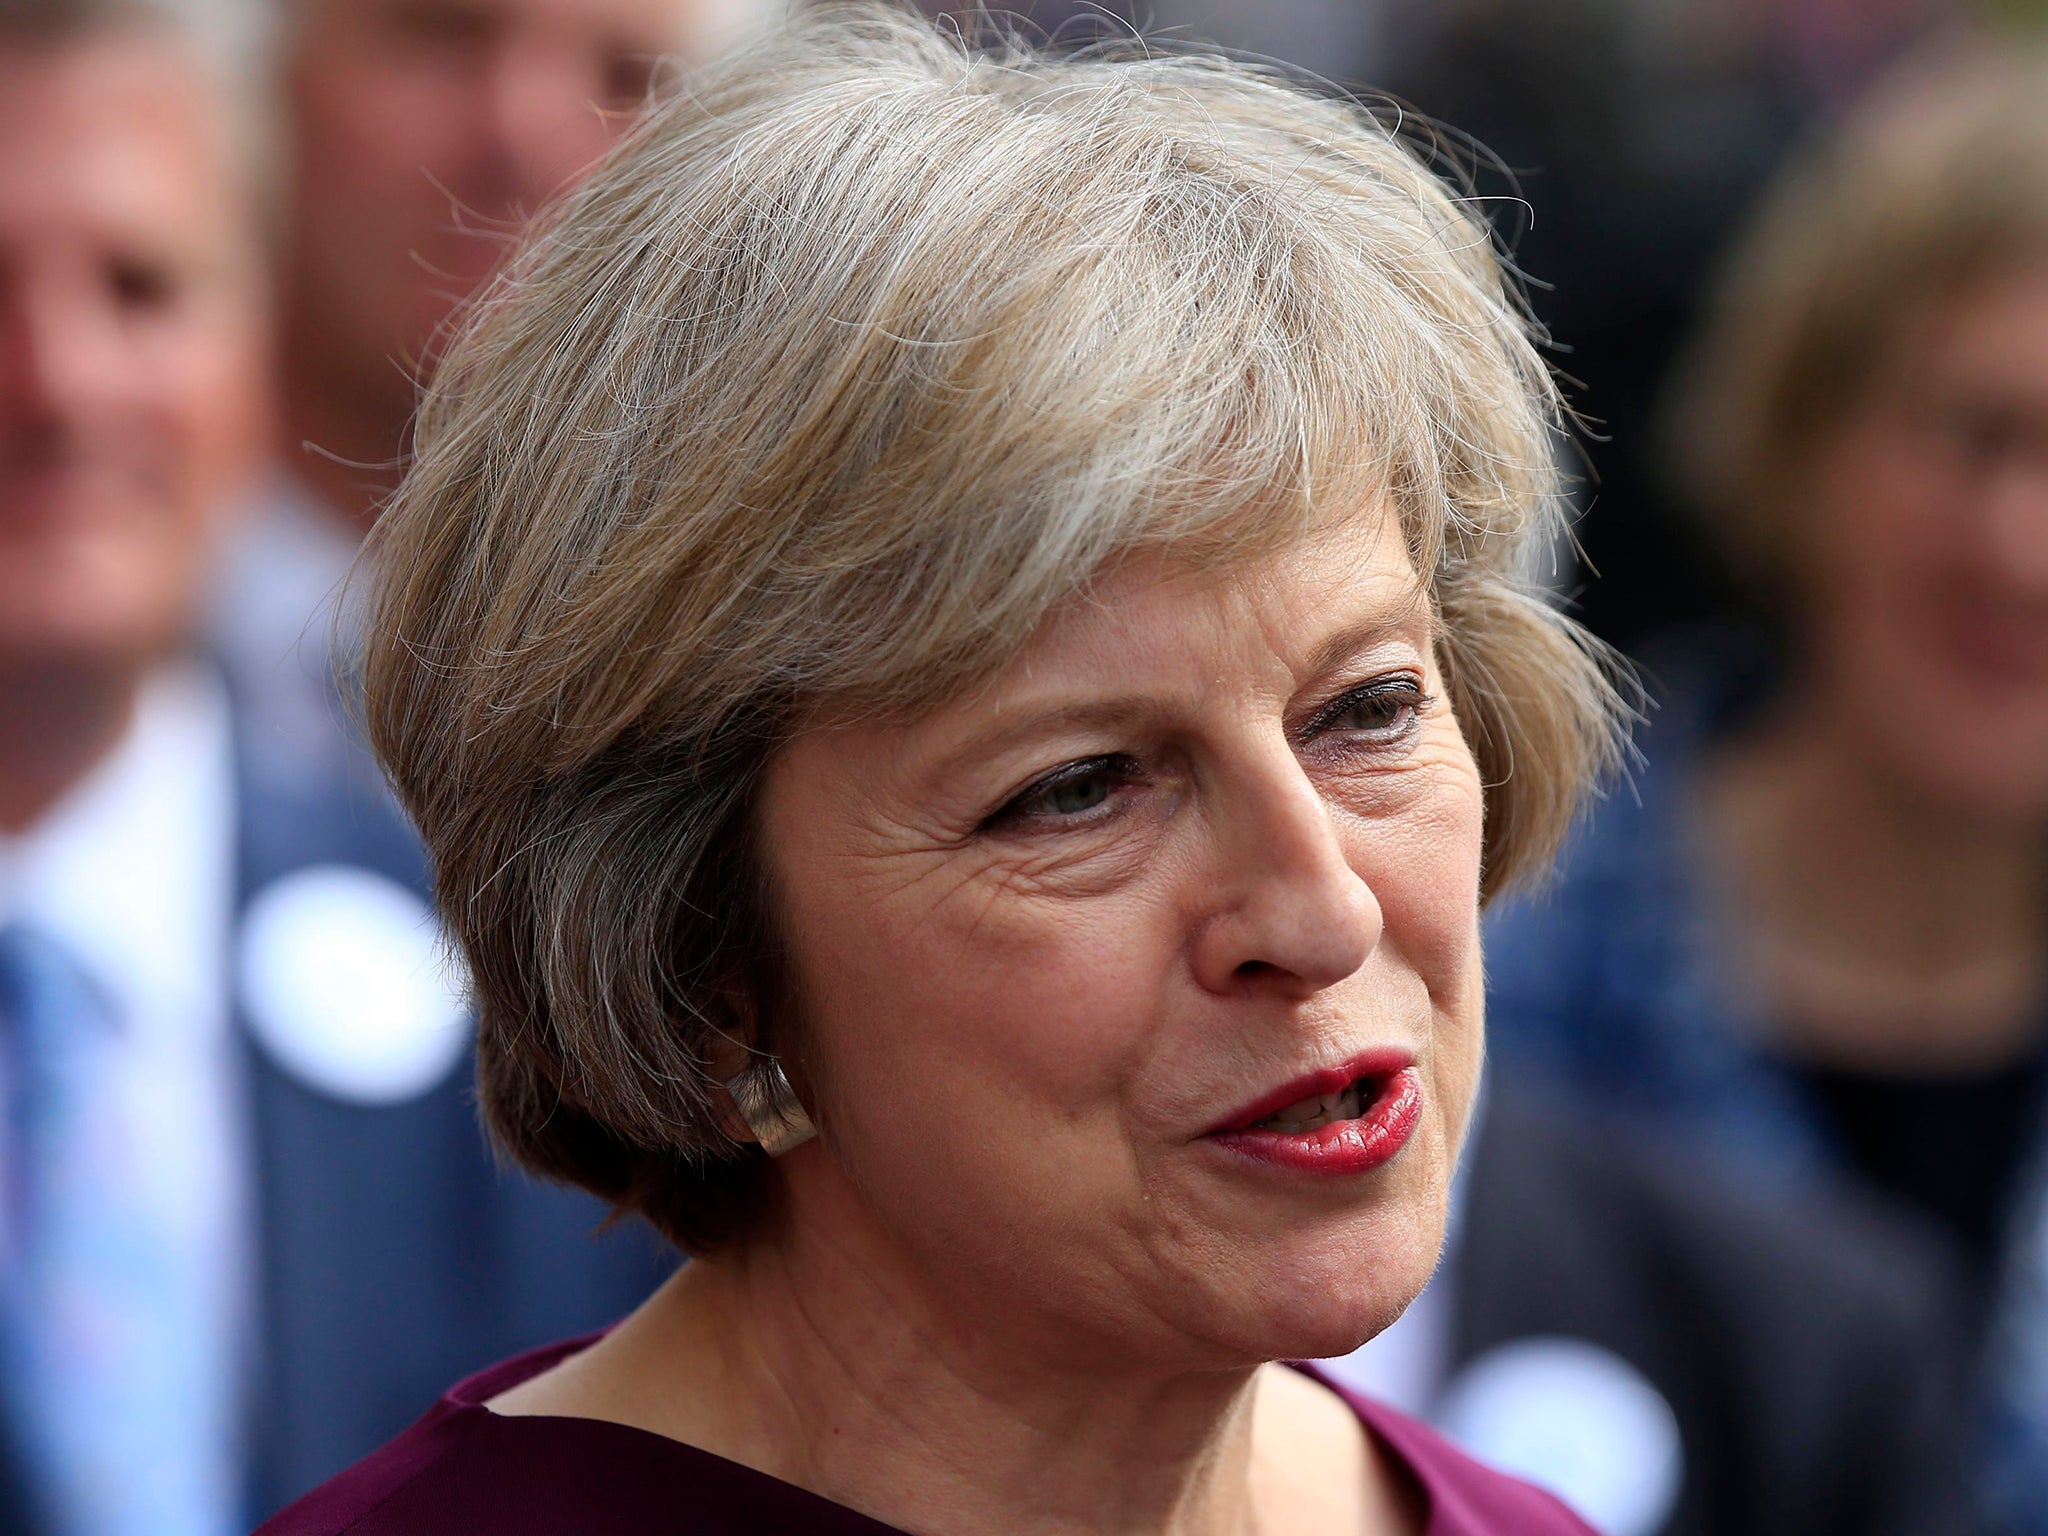 Most media reviews of May’s time in the Home Office were positive when she became PM